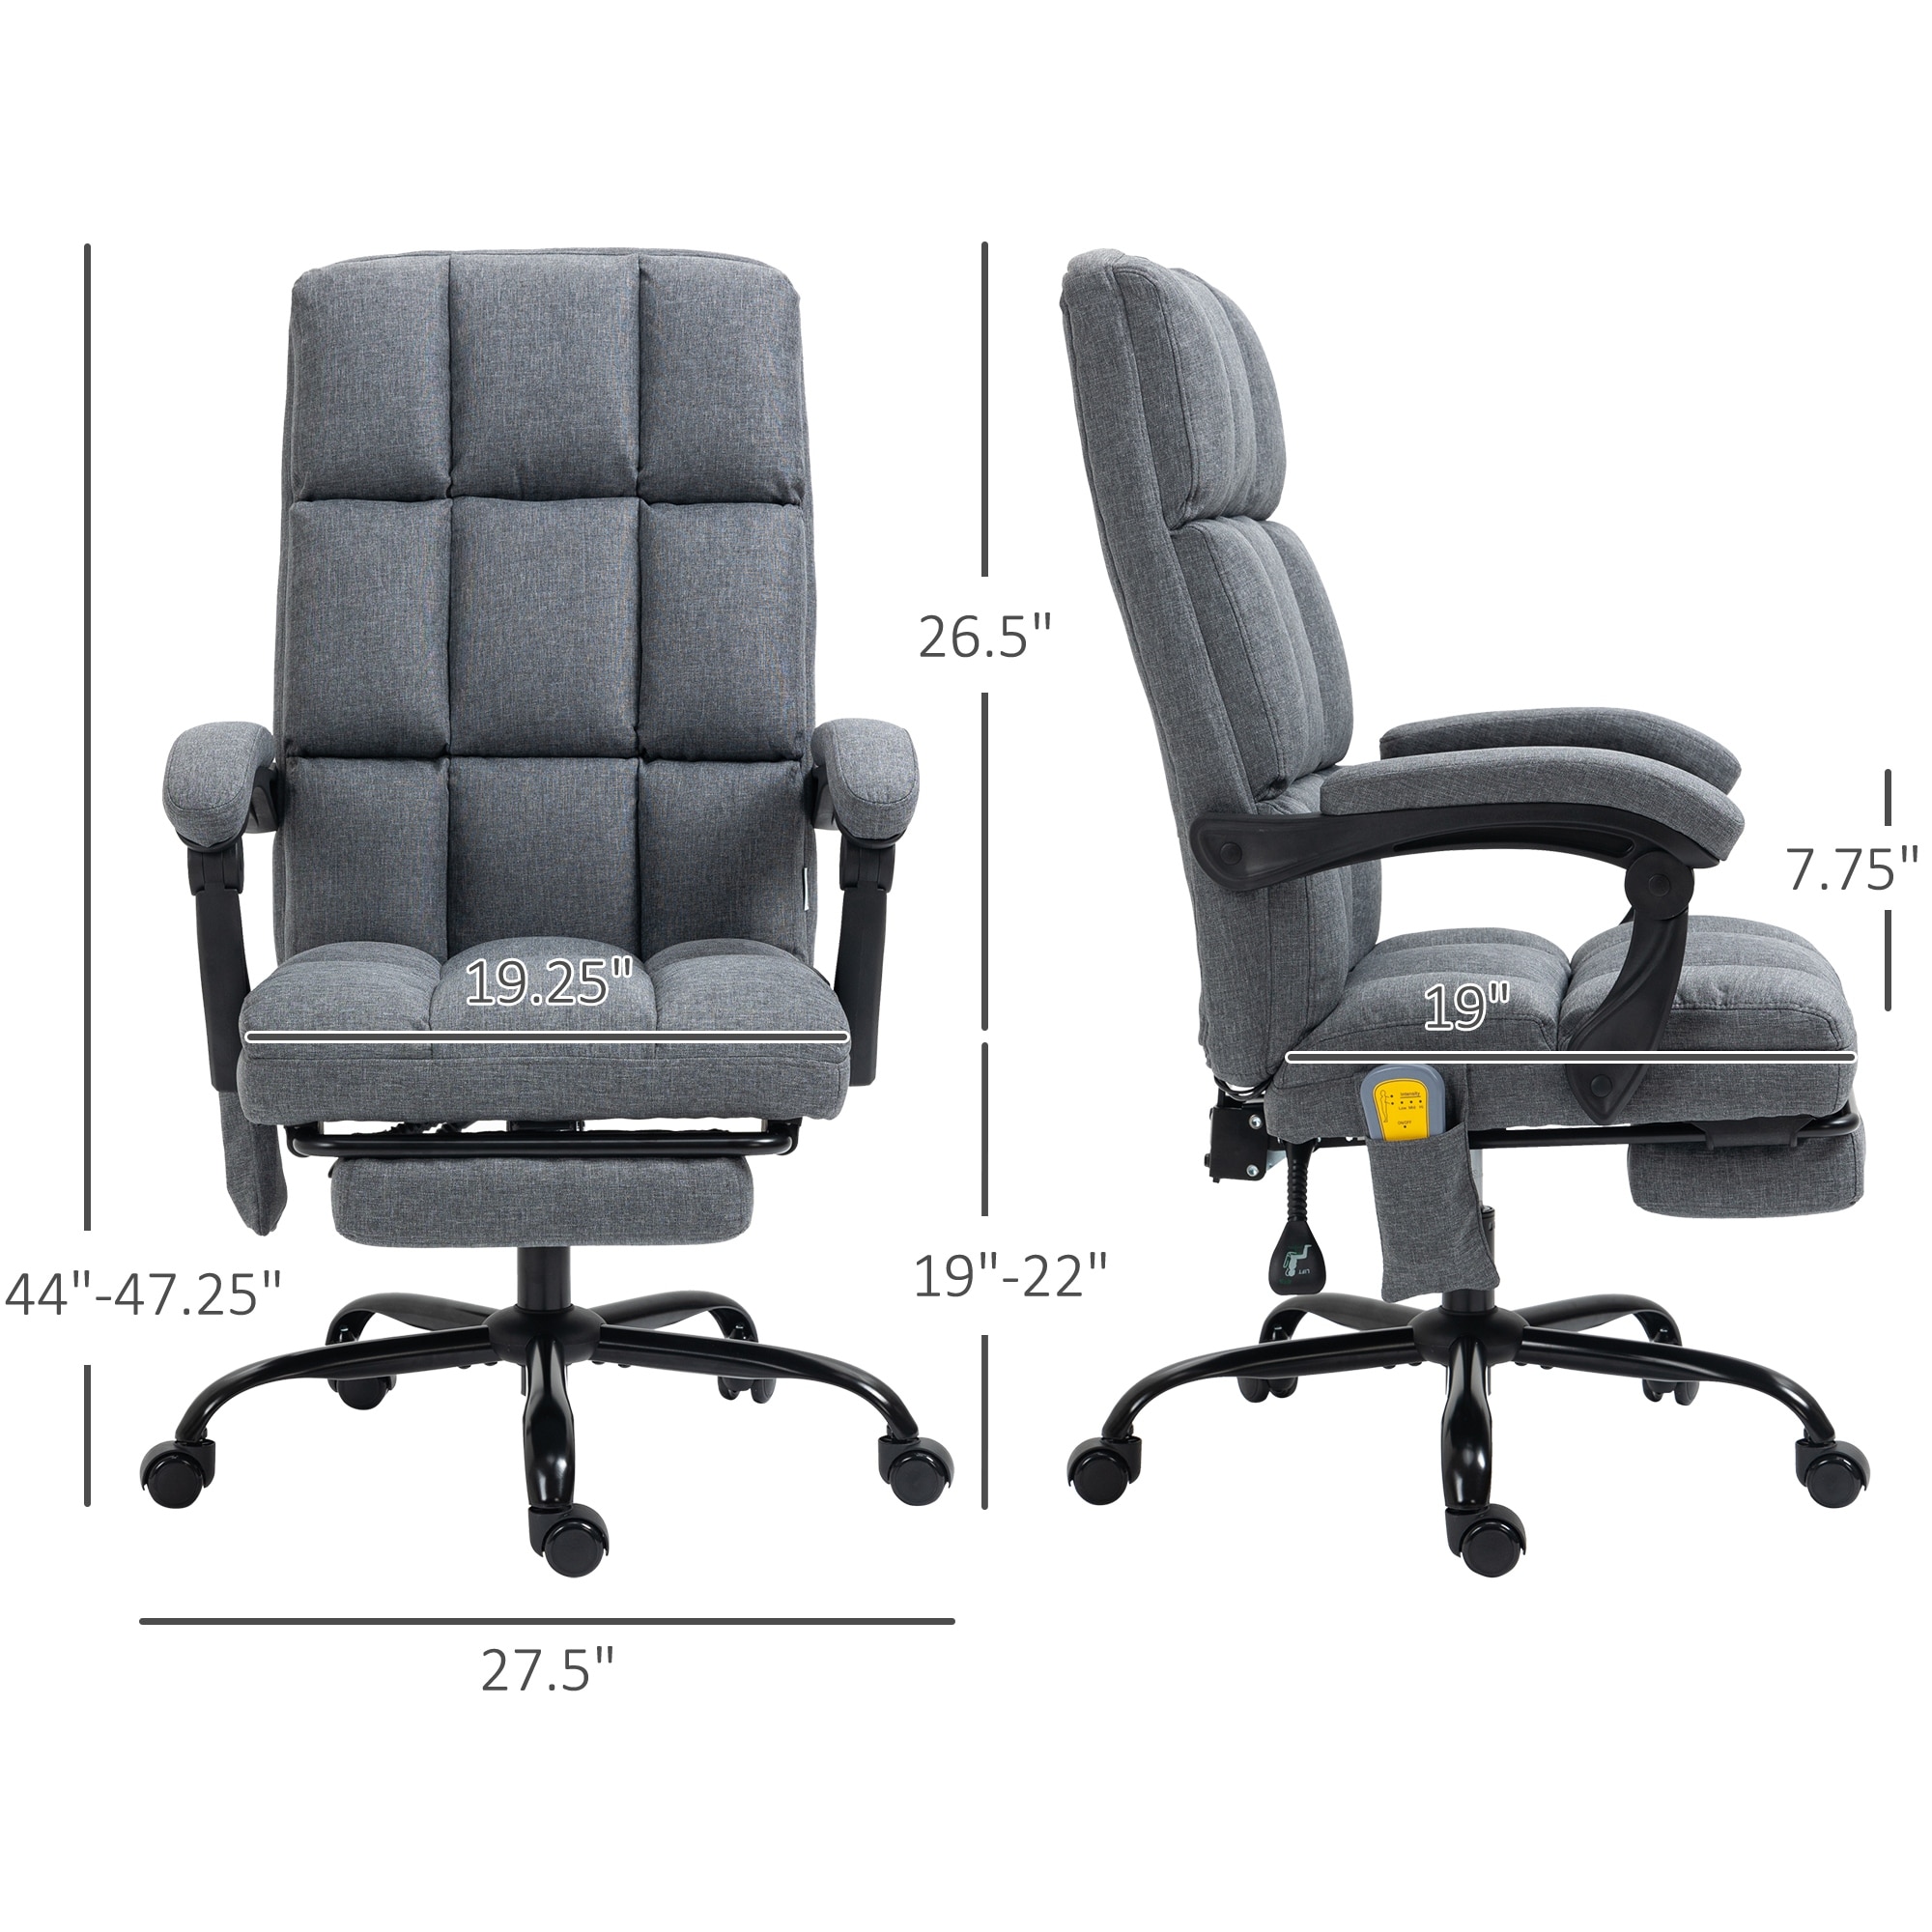 https://ak1.ostkcdn.com/images/products/is/images/direct/37cc1fa5941b3ee4c5efa23d4dd64eeddd2719f2/Vinsetto-High-Back-Vibration-Massaging-Office-Chair%2C-Reclining-Office-Chair-with-USB-Port%2C-Remote-Control-and-Footrest.jpg